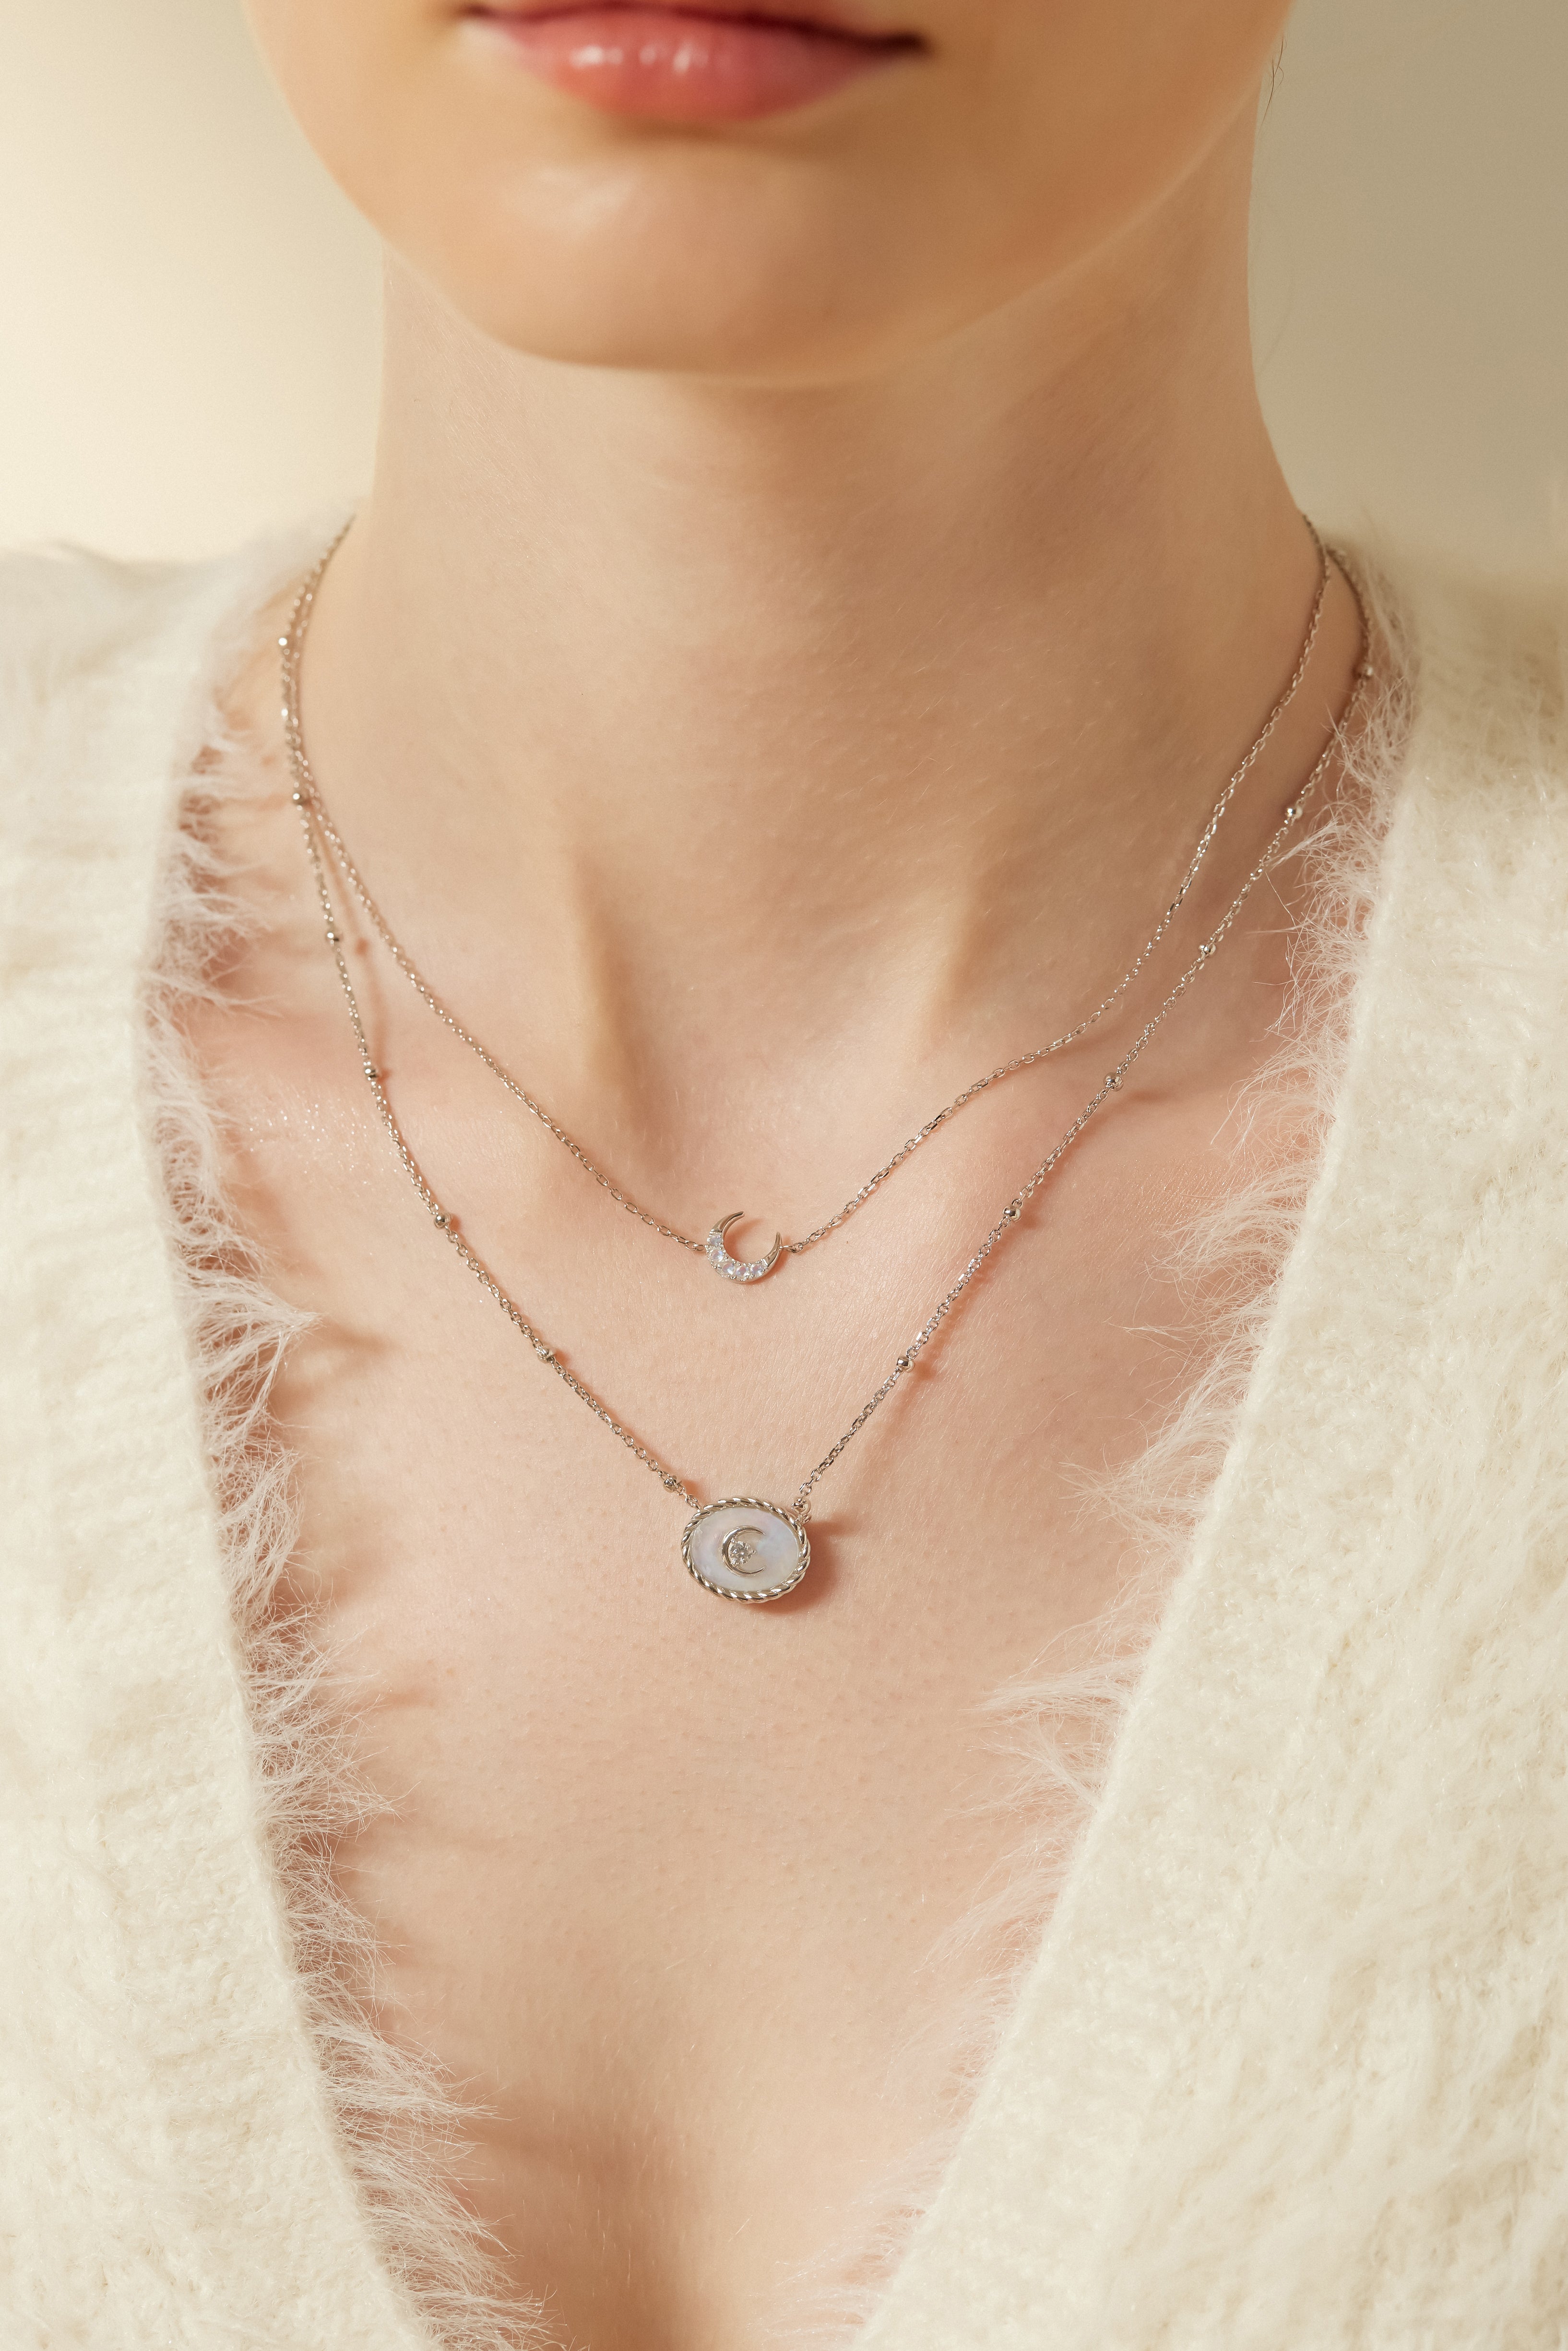 Moonstone Silver Crescent Moon Necklace - Keepsake | LOVE BY THE MOON